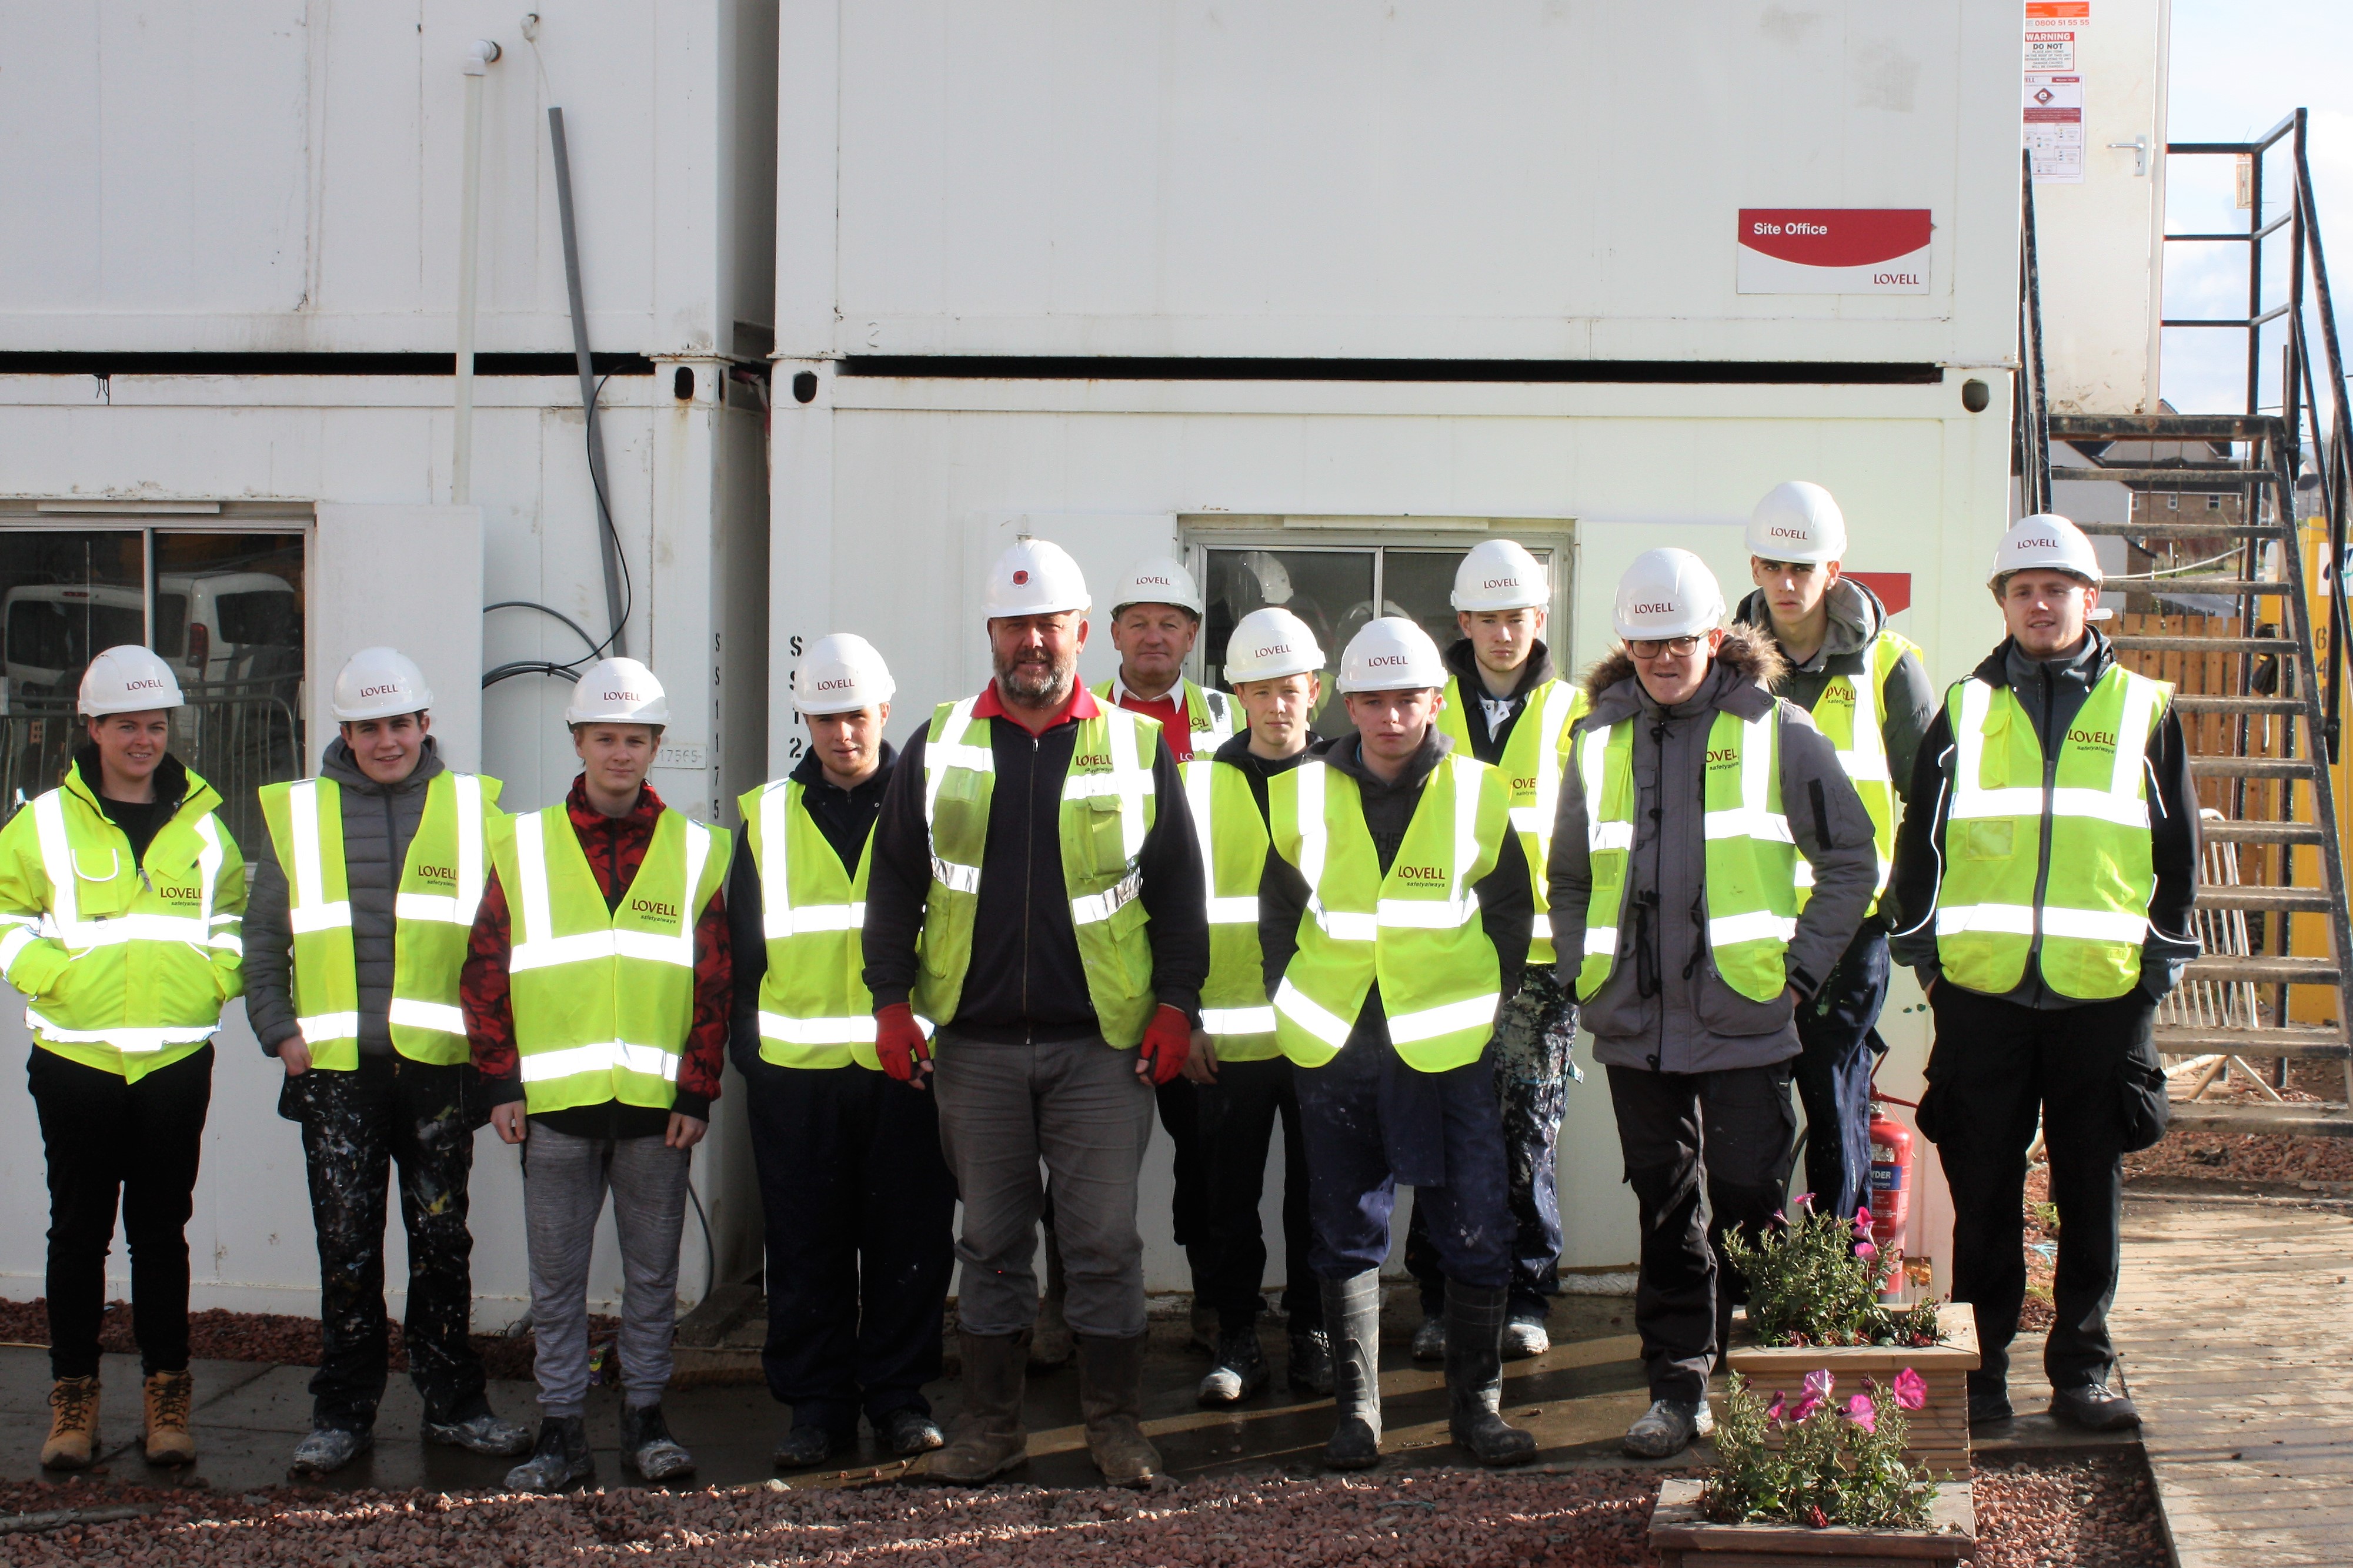 First steps into construction for young trainees at Lovell housing site